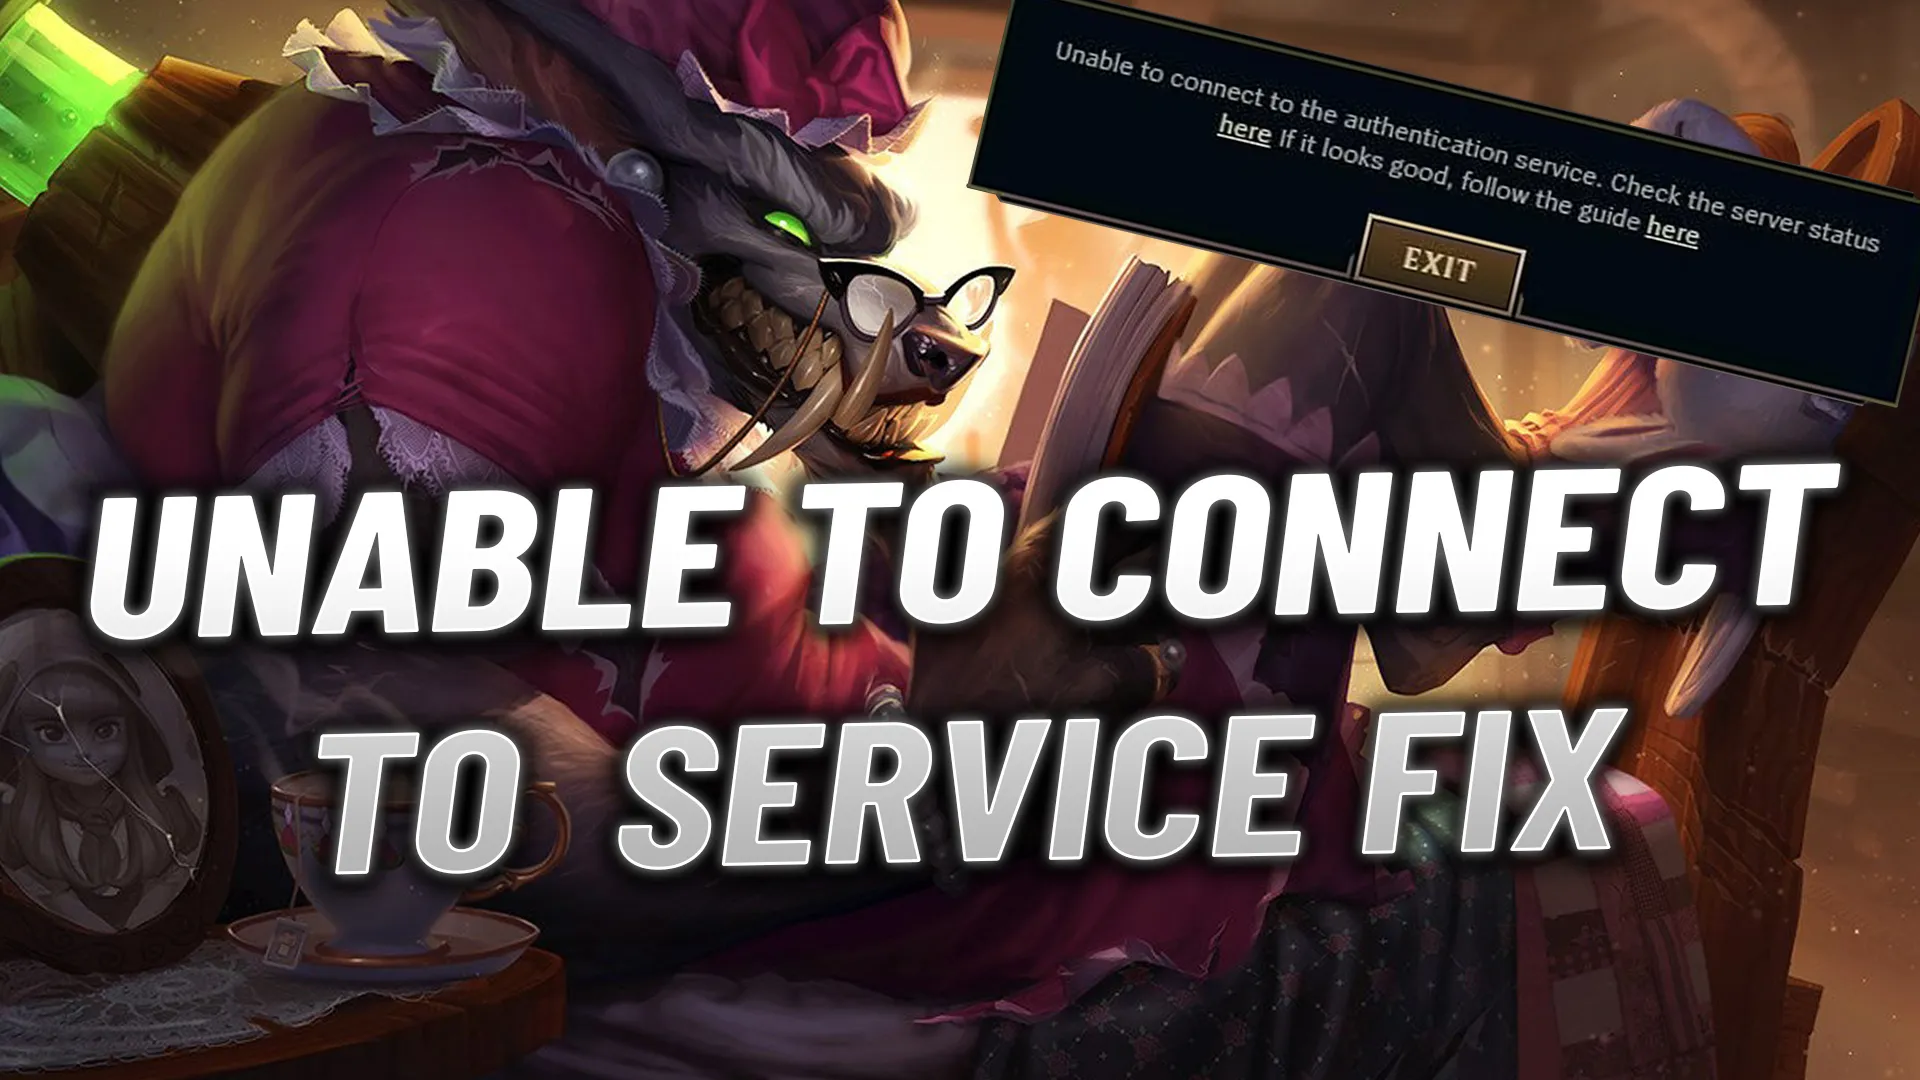 How To Fix Unable To Connect To Login Queue League of Legends 